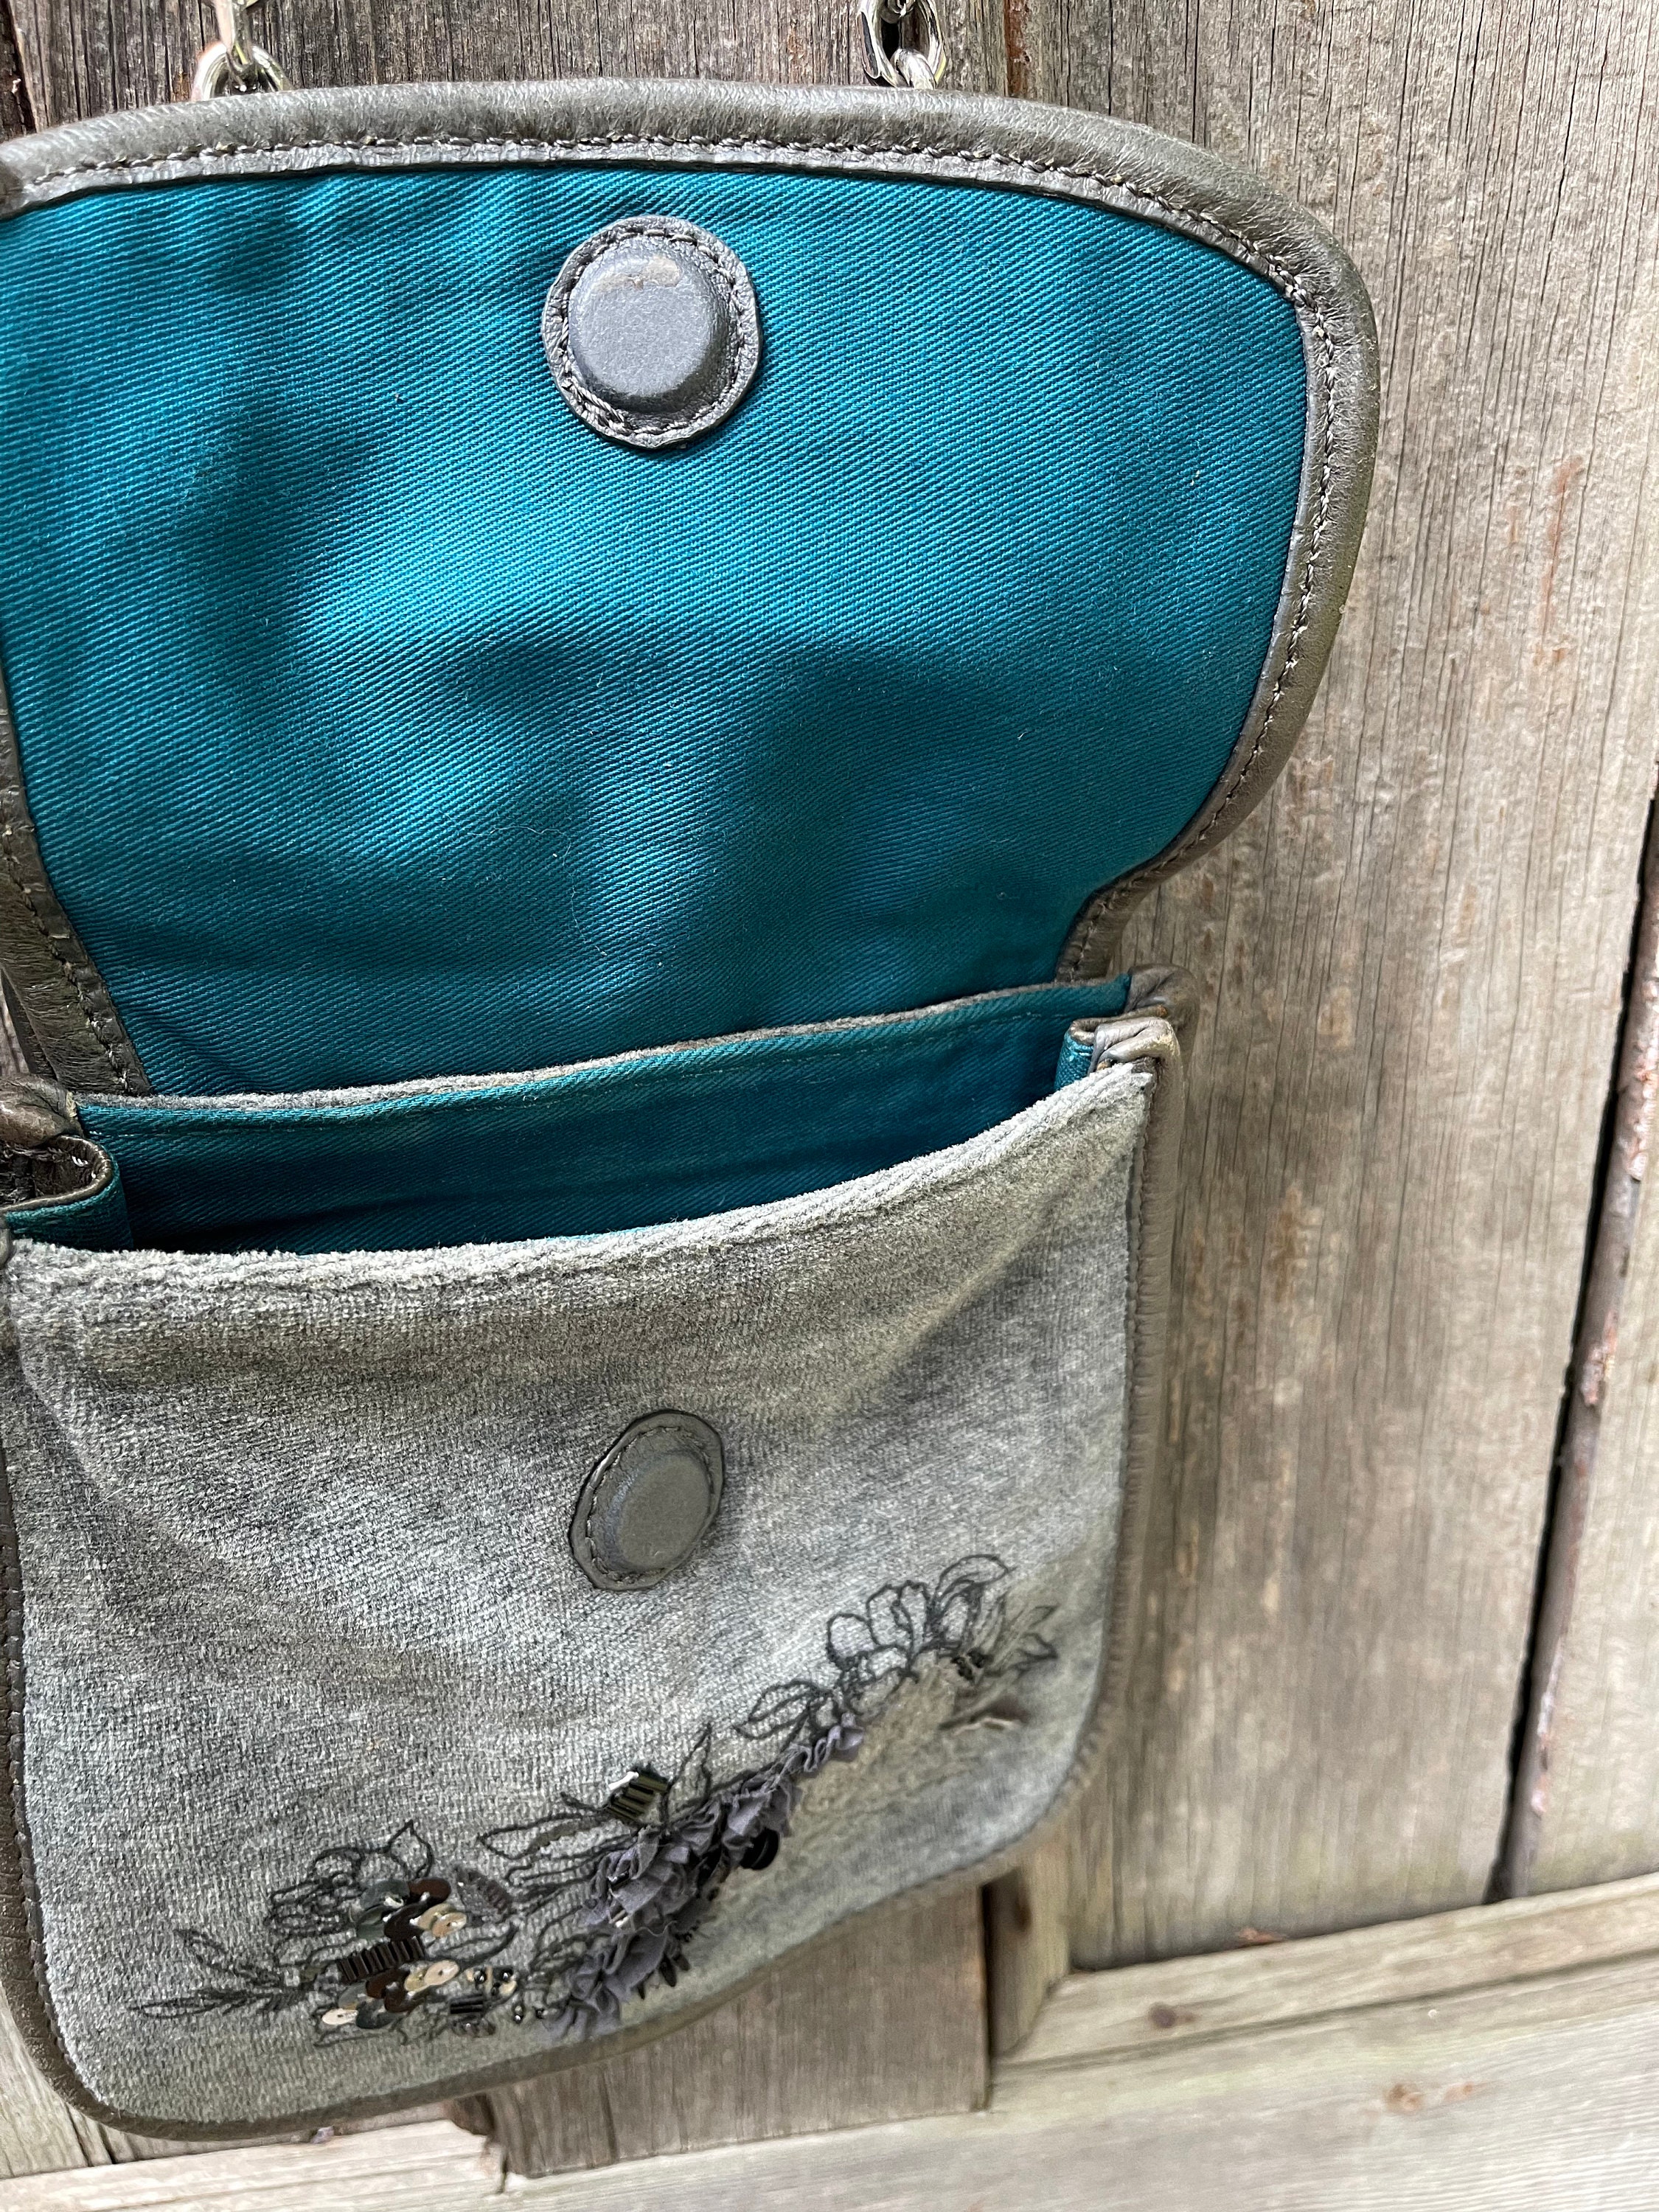 Charcoal grey crossbody bag What the fluff? – juicyjulesbags